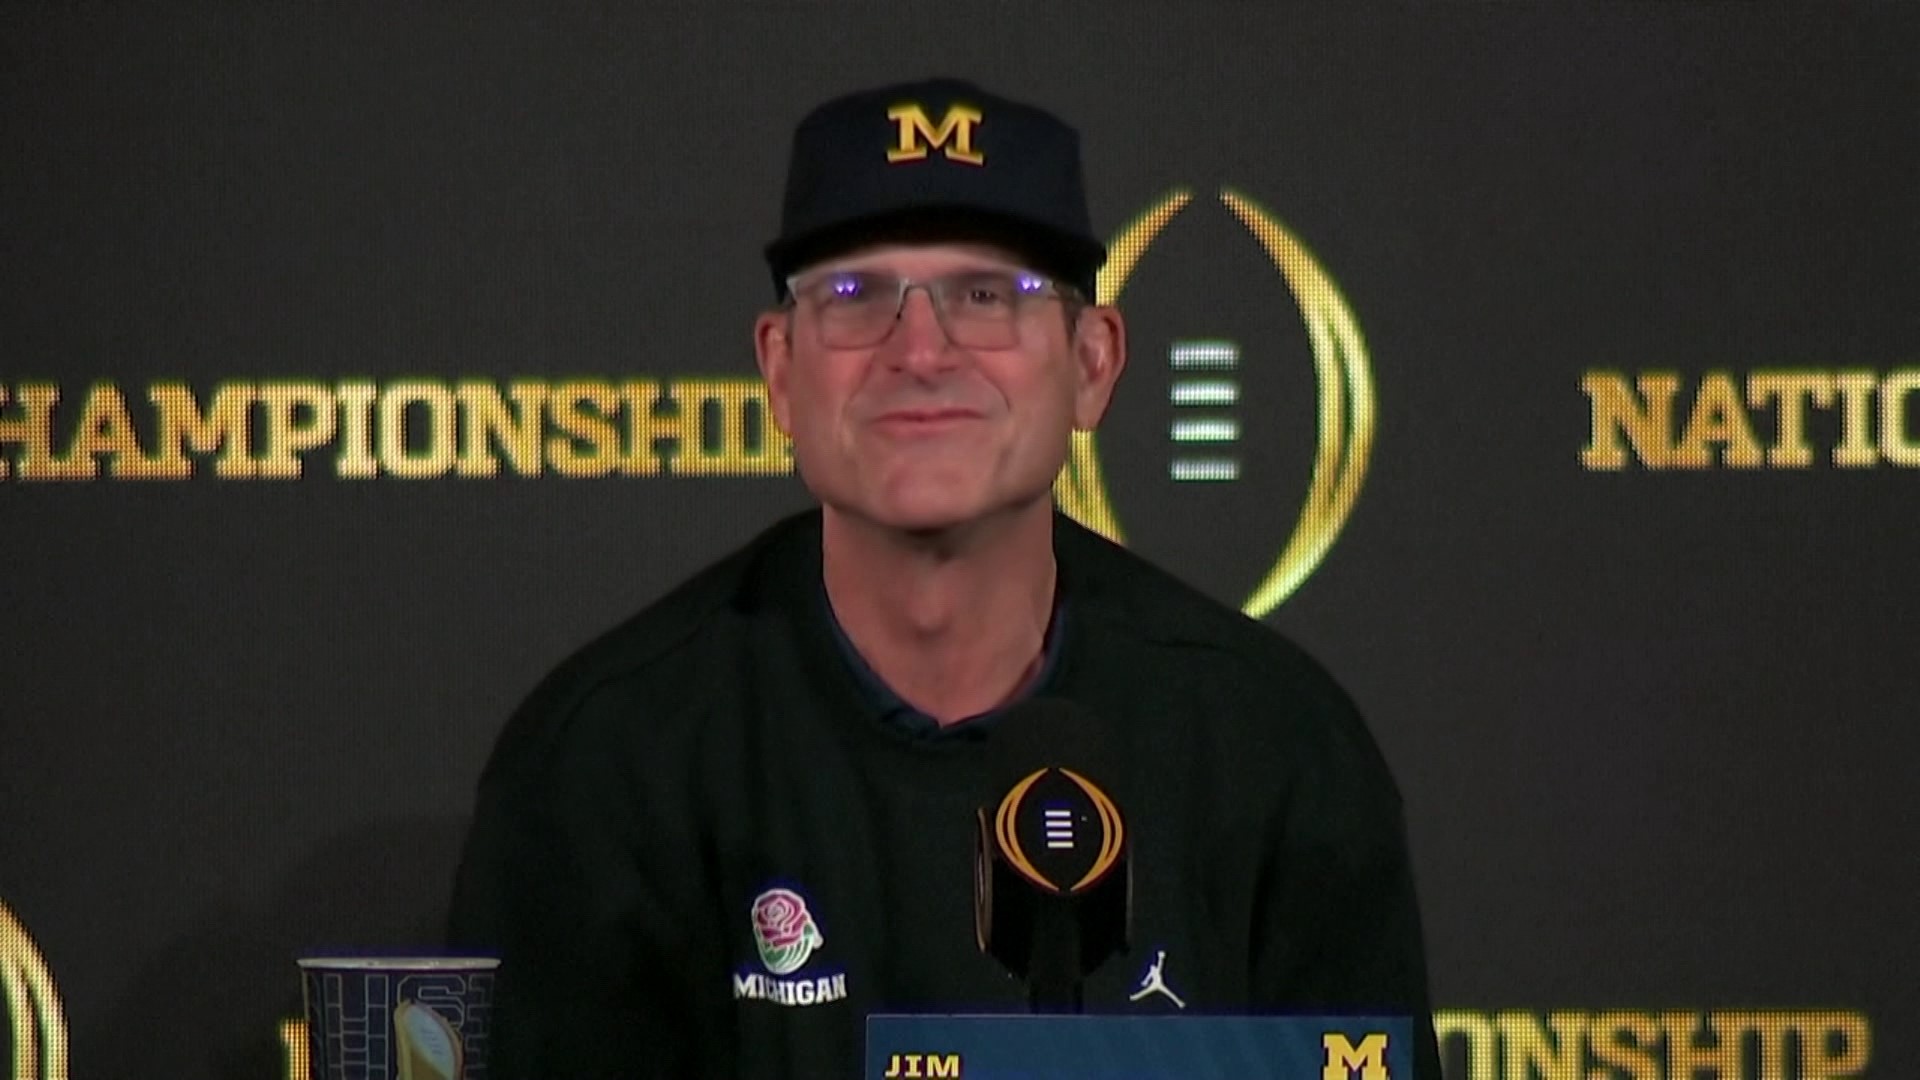 "My dad won a national championship, my brother won a Super Bowl...It's really cool. I feel like I can hold my head up high now," Michigan Coach Jim Harbaugh said.